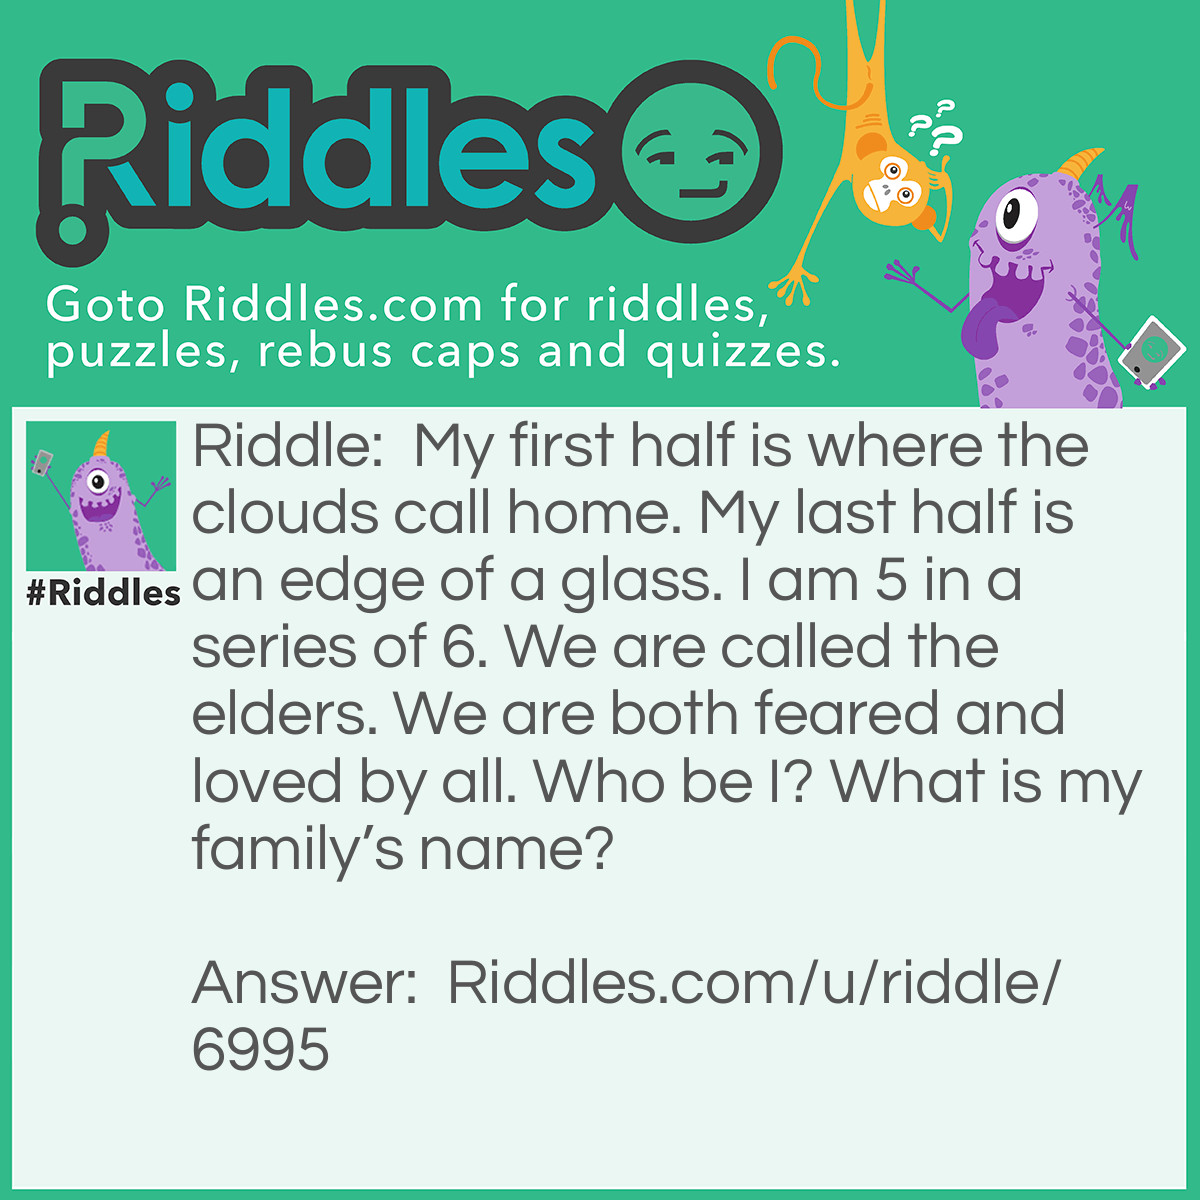 Riddle: My first half is where the clouds call home. My last half is an edge of a glass. I am 5 in a series of 6. We are called the elders. We are both feared and loved by all. Who be I? What is my family's name? Answer: Skyrim. The elder scrolls.